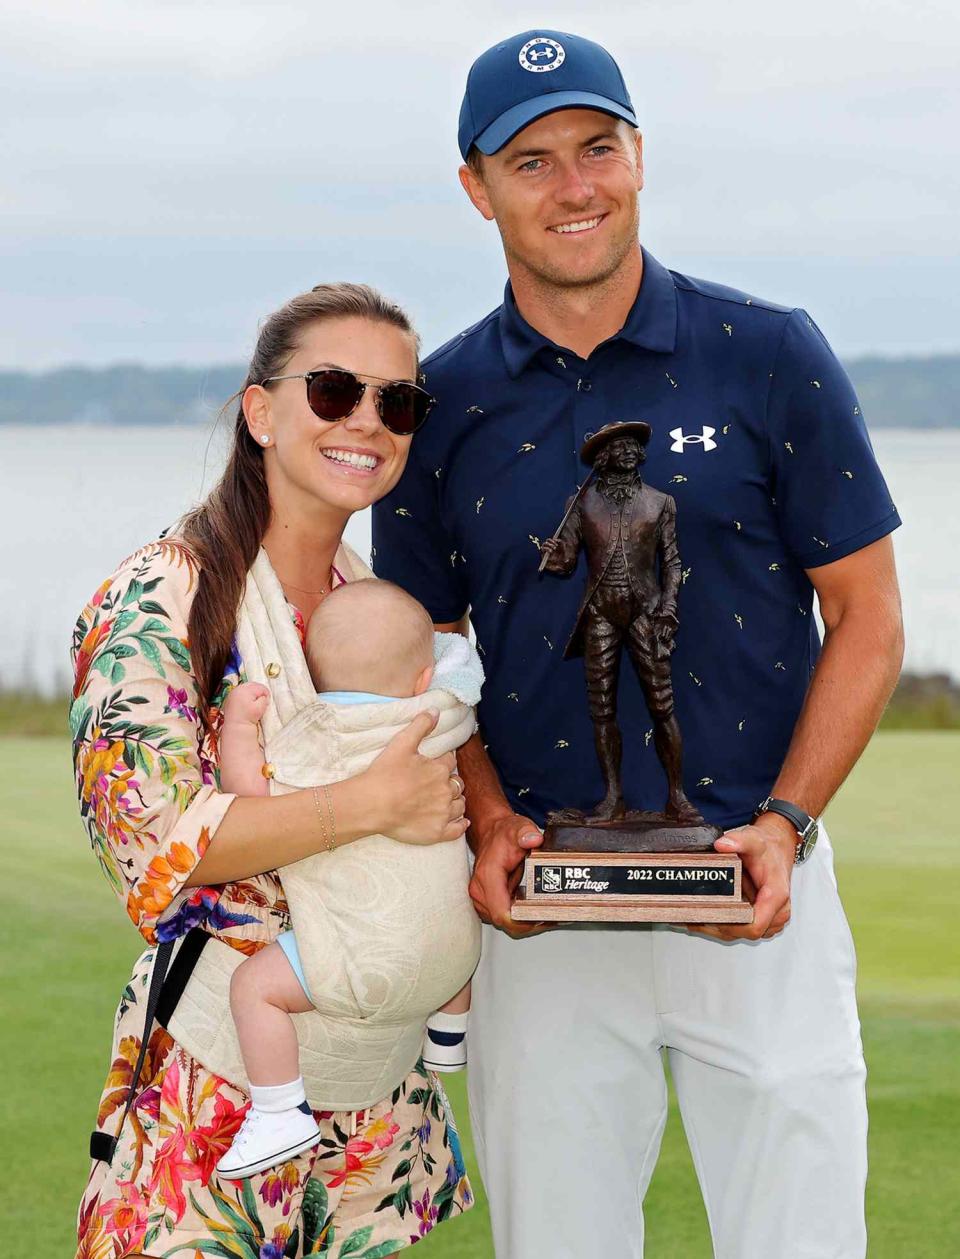 Jordan Spieth poses with the trophy with wife Annie Verret and son Sammy Spieth at Harbor Town Golf Links on April 17, 2022 in Hilton Head Island, South Carolina